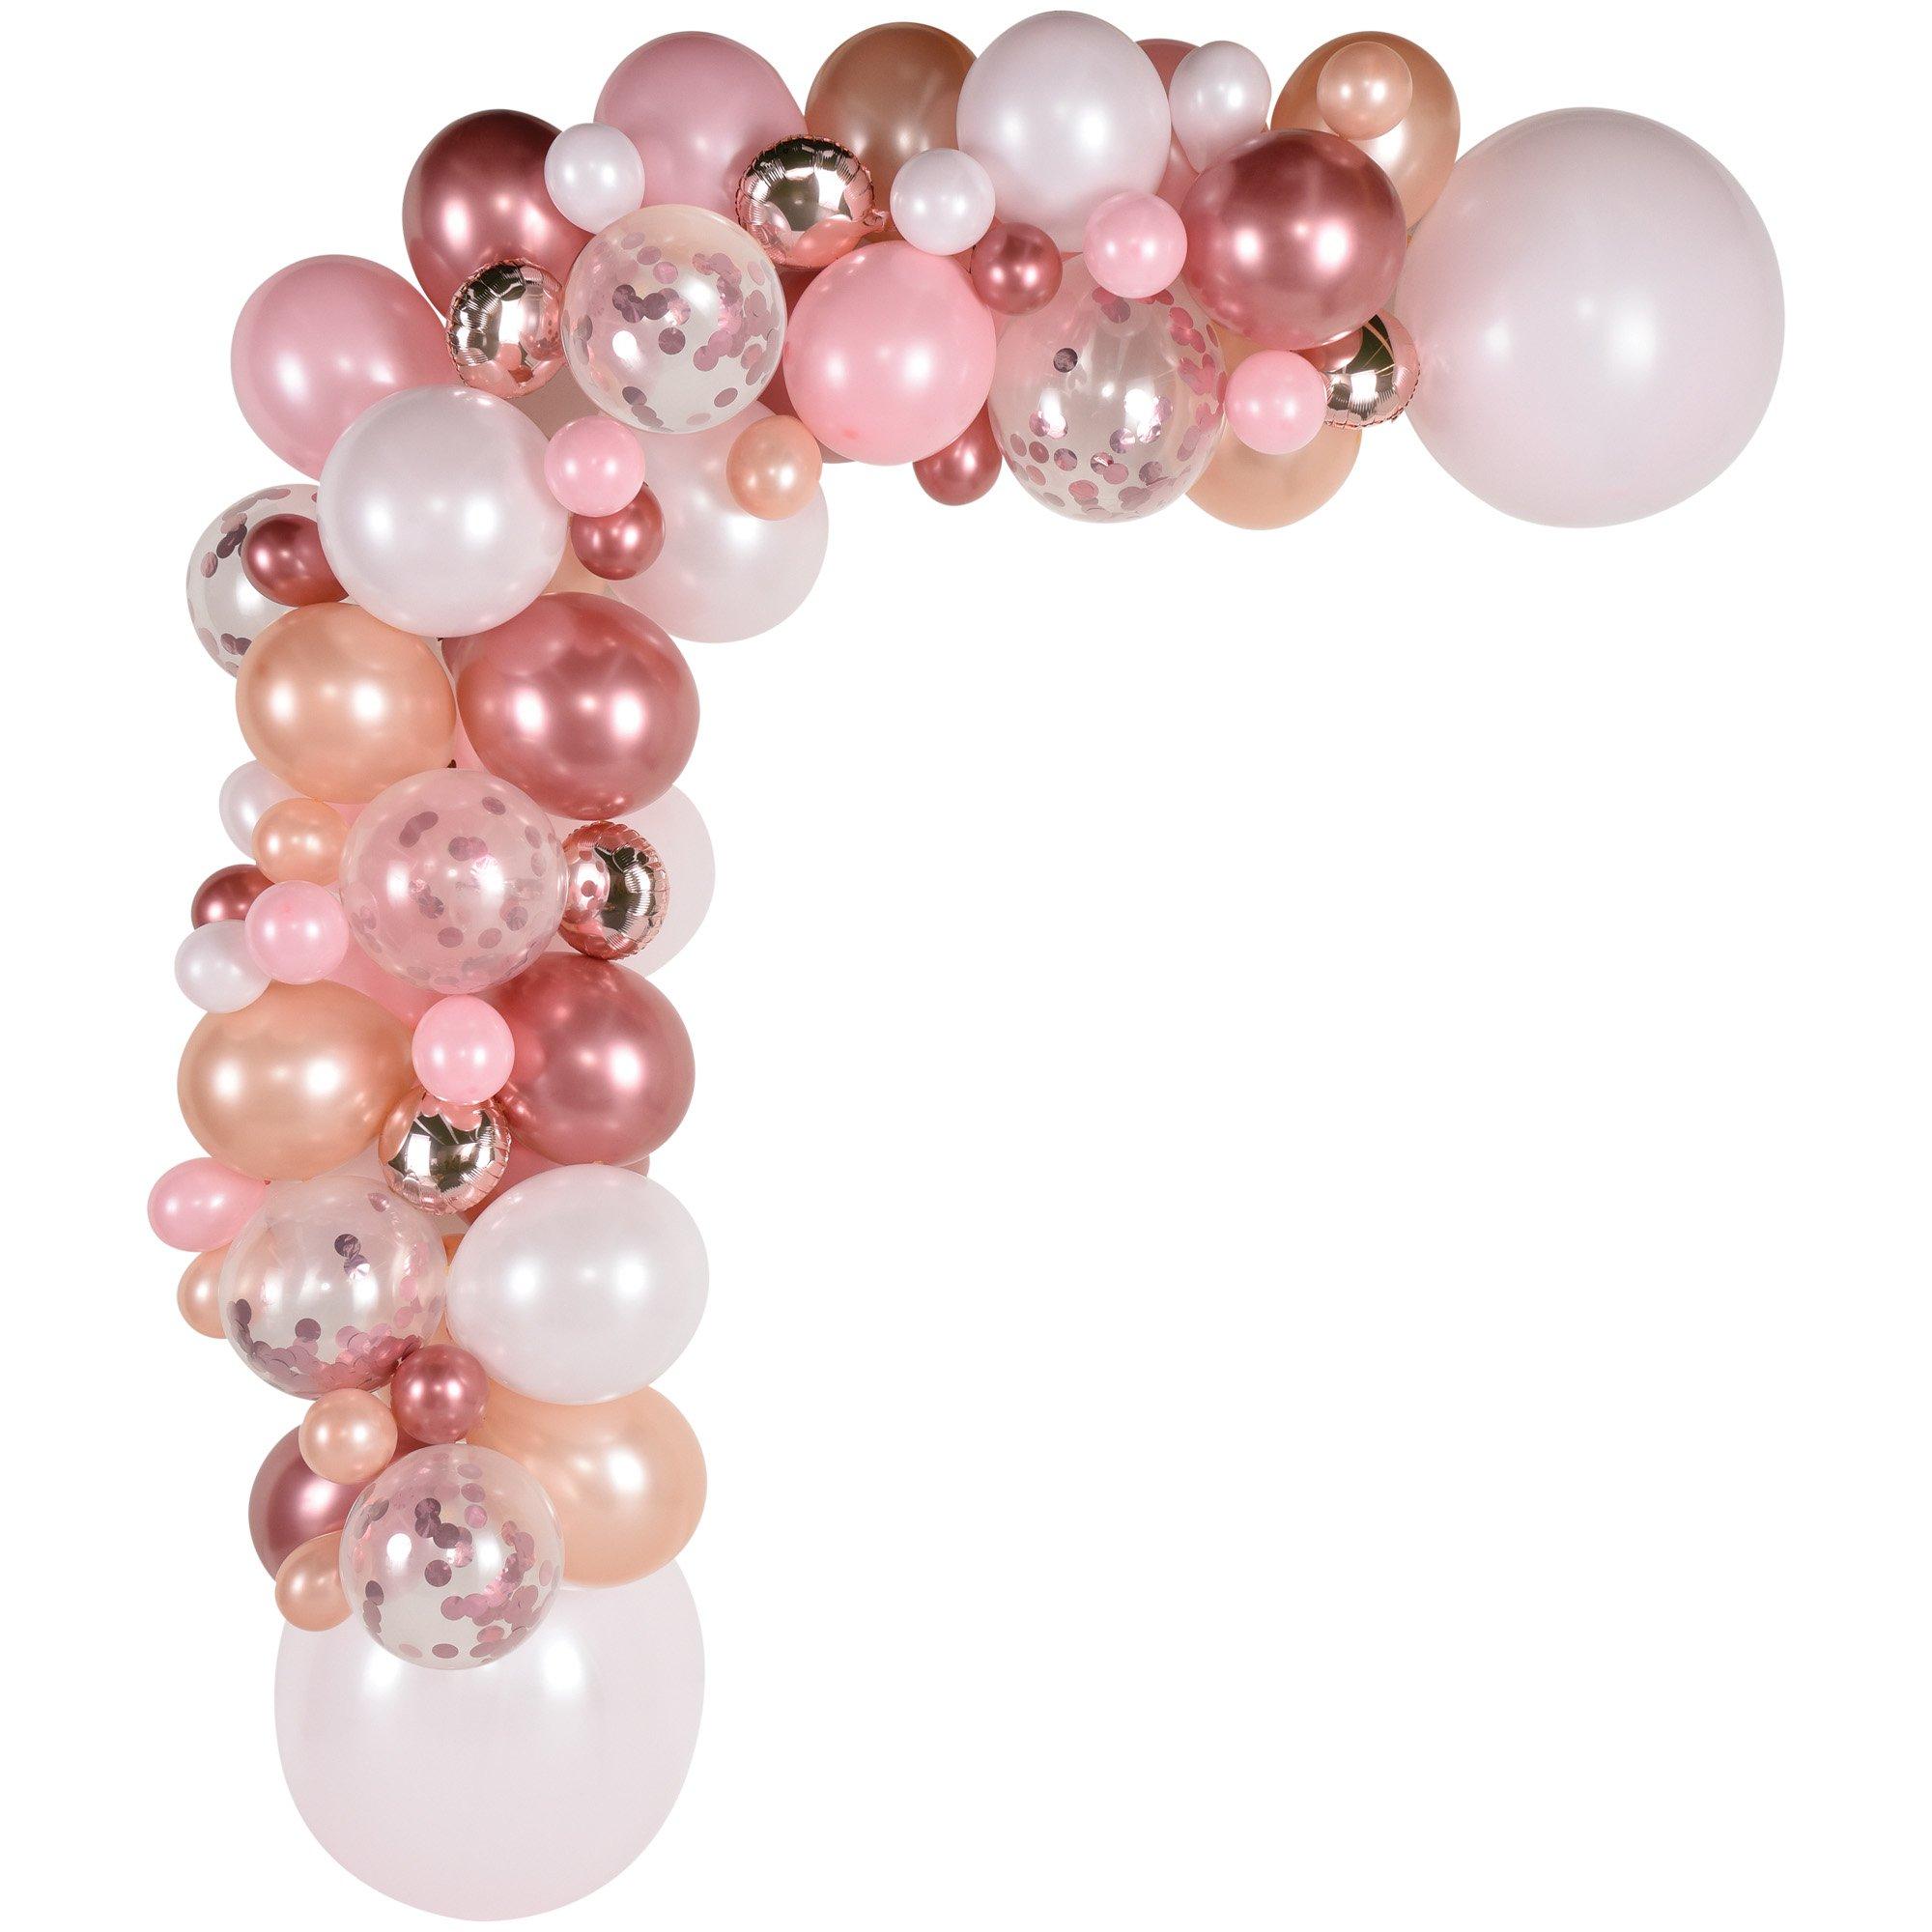 15ct, 11in, Rose Gold 3-Color Mix Latex Balloons - Pinks & Rose Gold